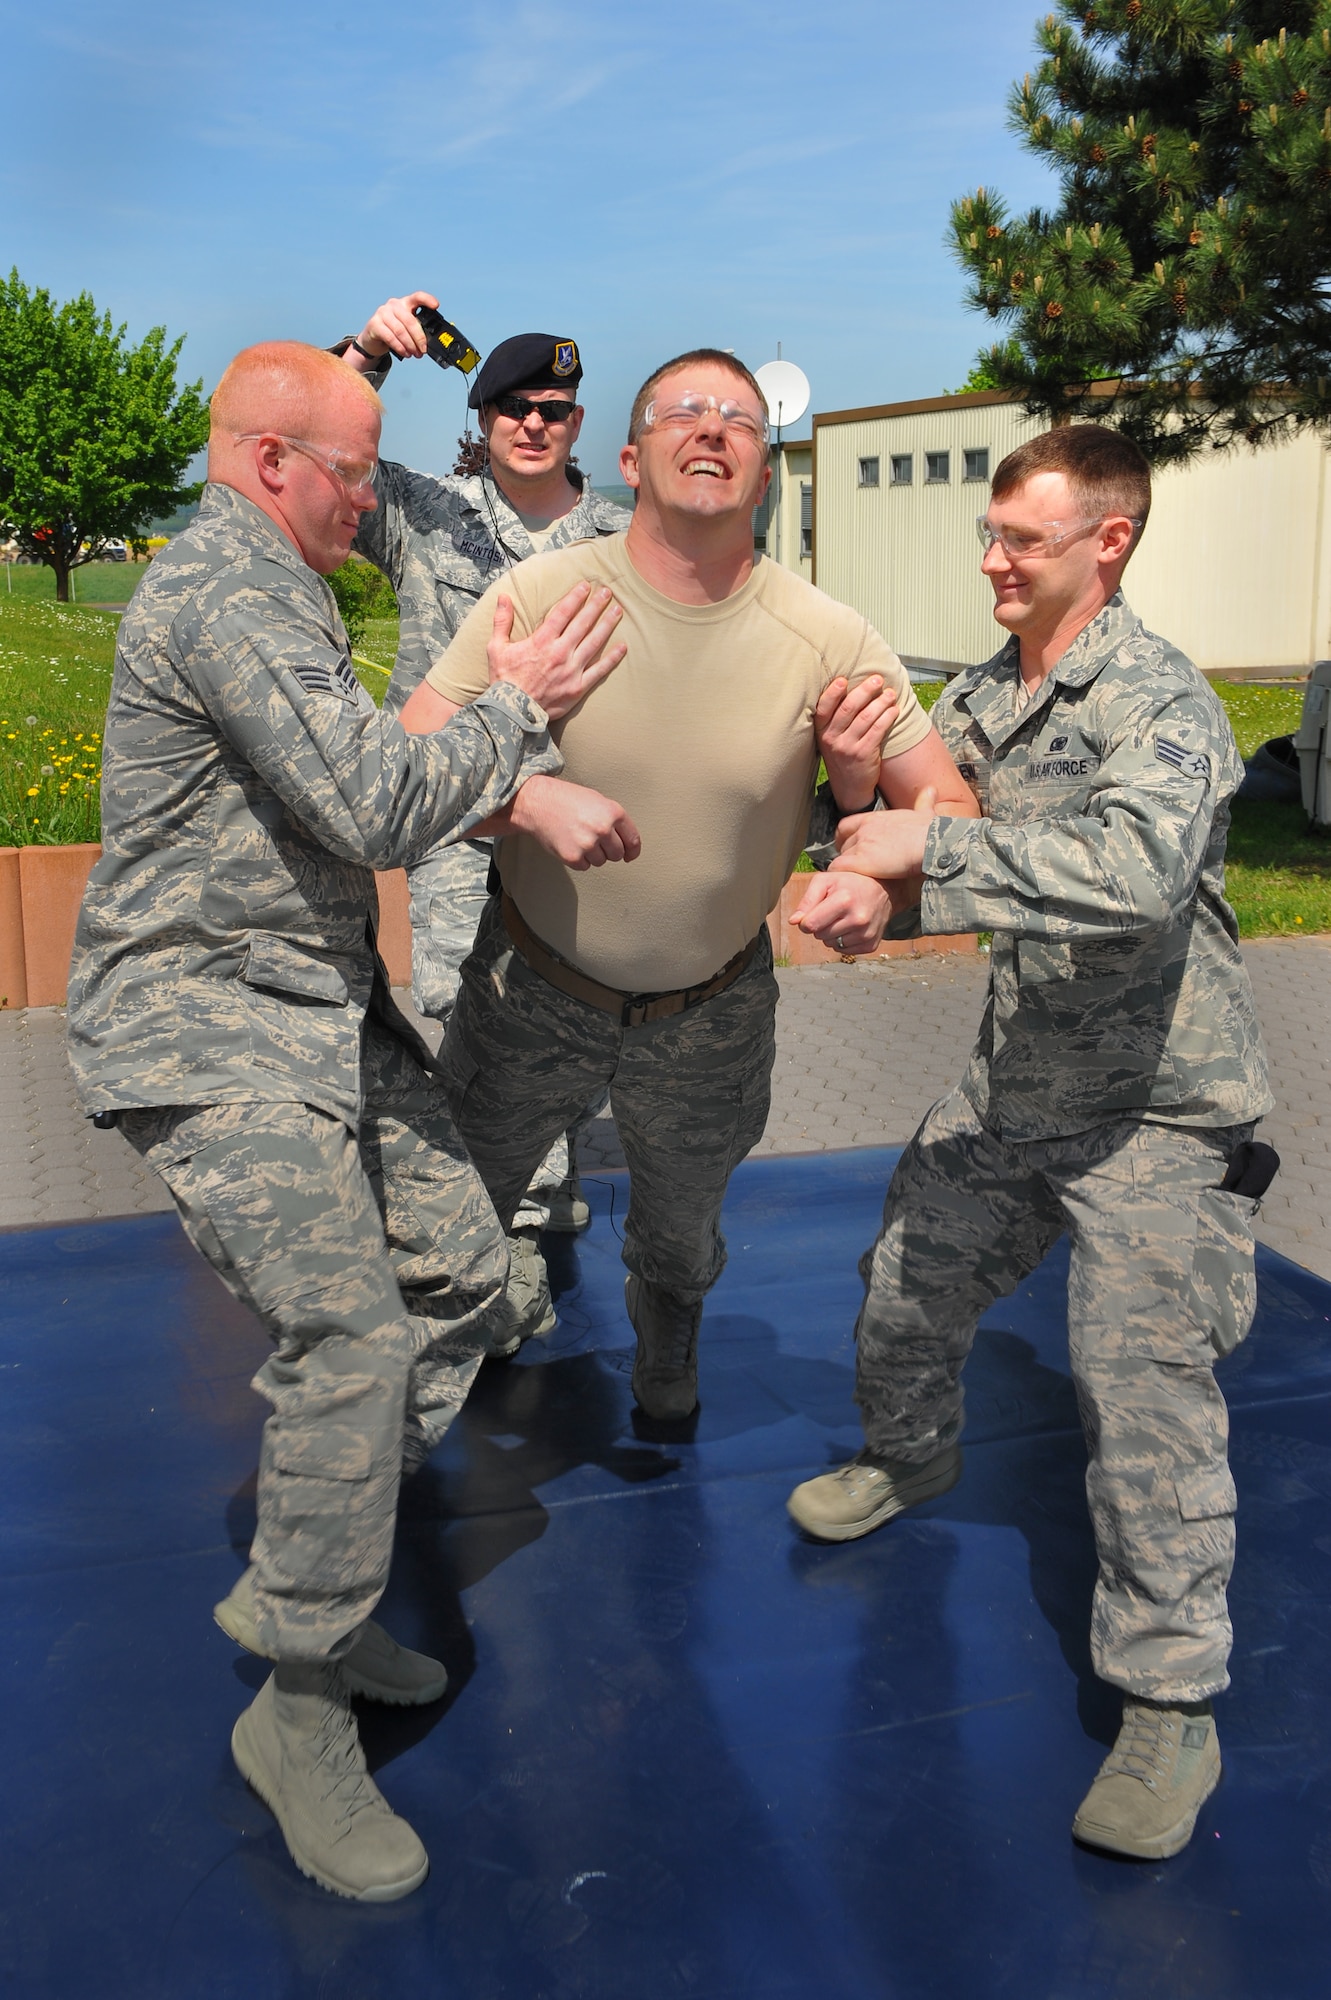 SPANGDAHLEM AIR BASE, Germany – Senior Airman Jod Nicholson, center, 52nd Security Forces Squadron patrolman, clenches while being tazed during a non-lethal weapons demonstration for National Police Week outside the Spangdahlem Commissary May 14. The 52nd SFS put on multiple demonstrations such as military working dog capabilities, weapons and combat vehicle displays and taser demonstrations to give spectators an insight into various aspects of security forces capabilities. National Police Week is held annually during the week of May 15 and honors all law enforcement members who have died. National Police Week events continue this week with an annual ruck march around the base May 16 at 10 a.m. and the defender decathlon May 17 beginning at 9 a.m. on Perimeter Road here. (U.S. Air Force photo by Airman 1st Class Dillon Davis/Released)